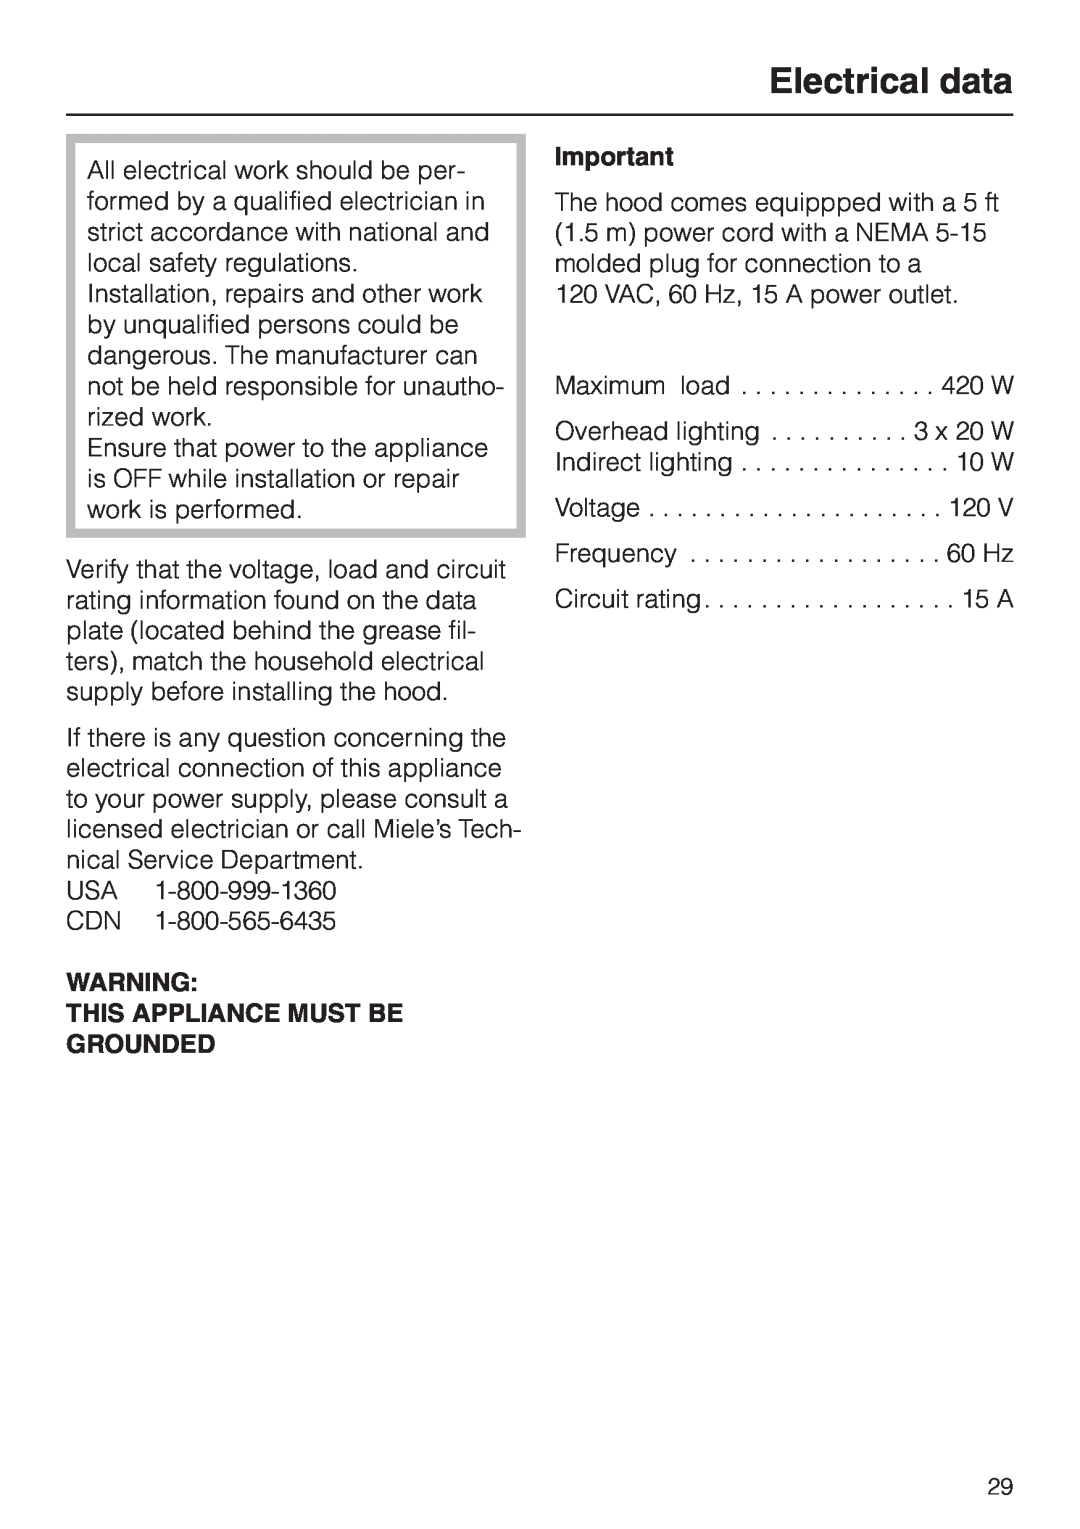 Miele DA279-3 installation instructions Electrical data, This Appliance Must Be Grounded 